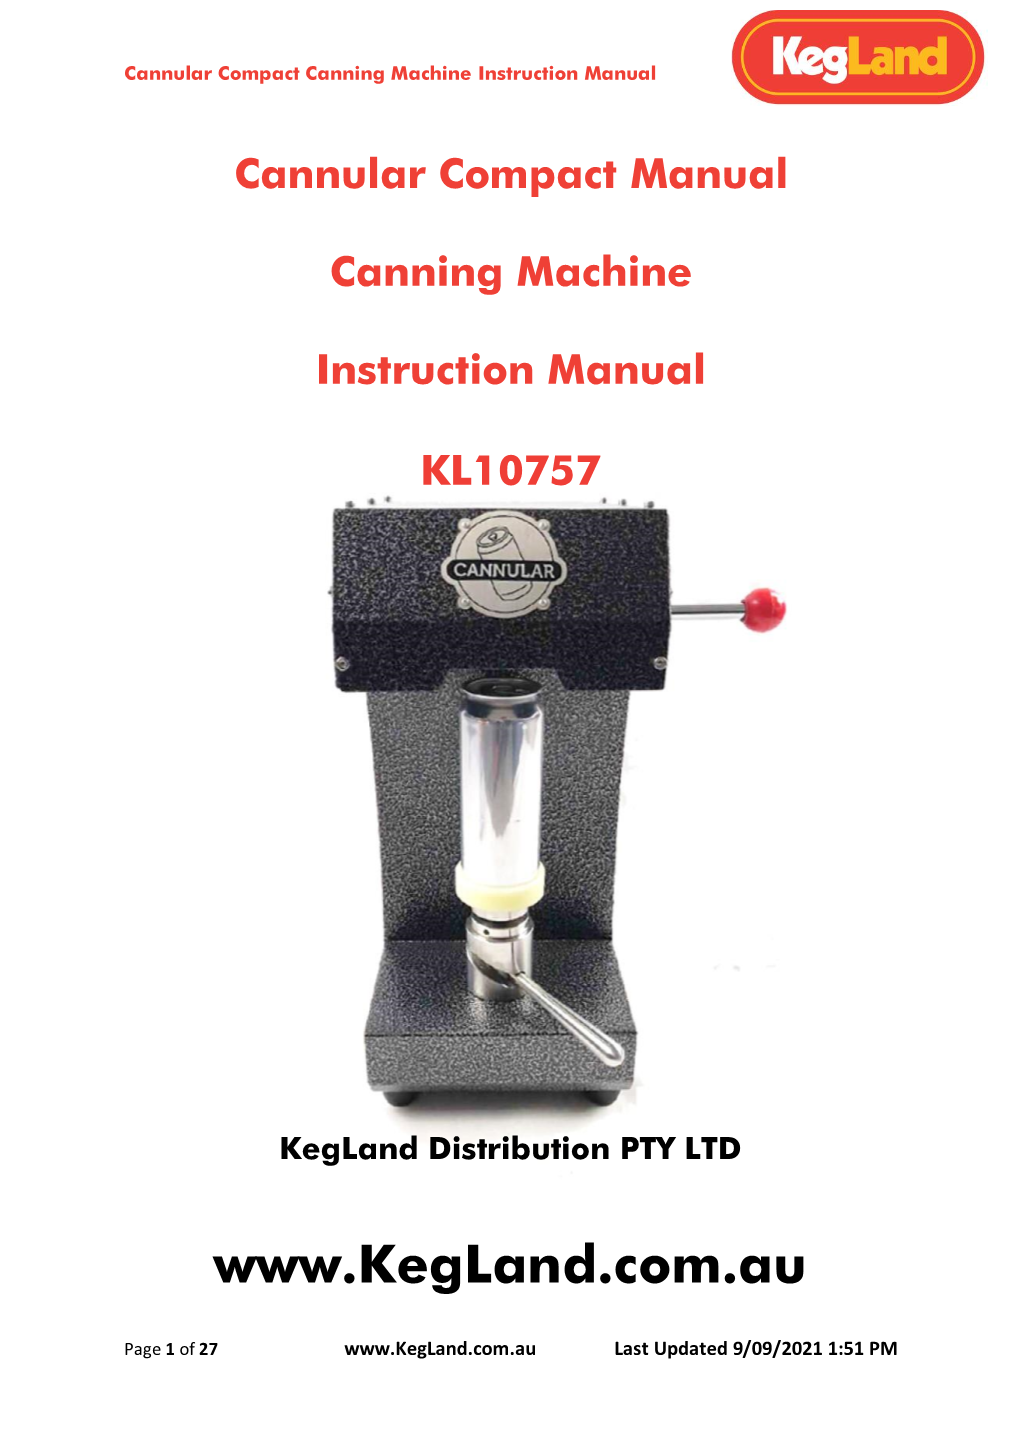 Cannular Compact Canning Machine Instruction Manual